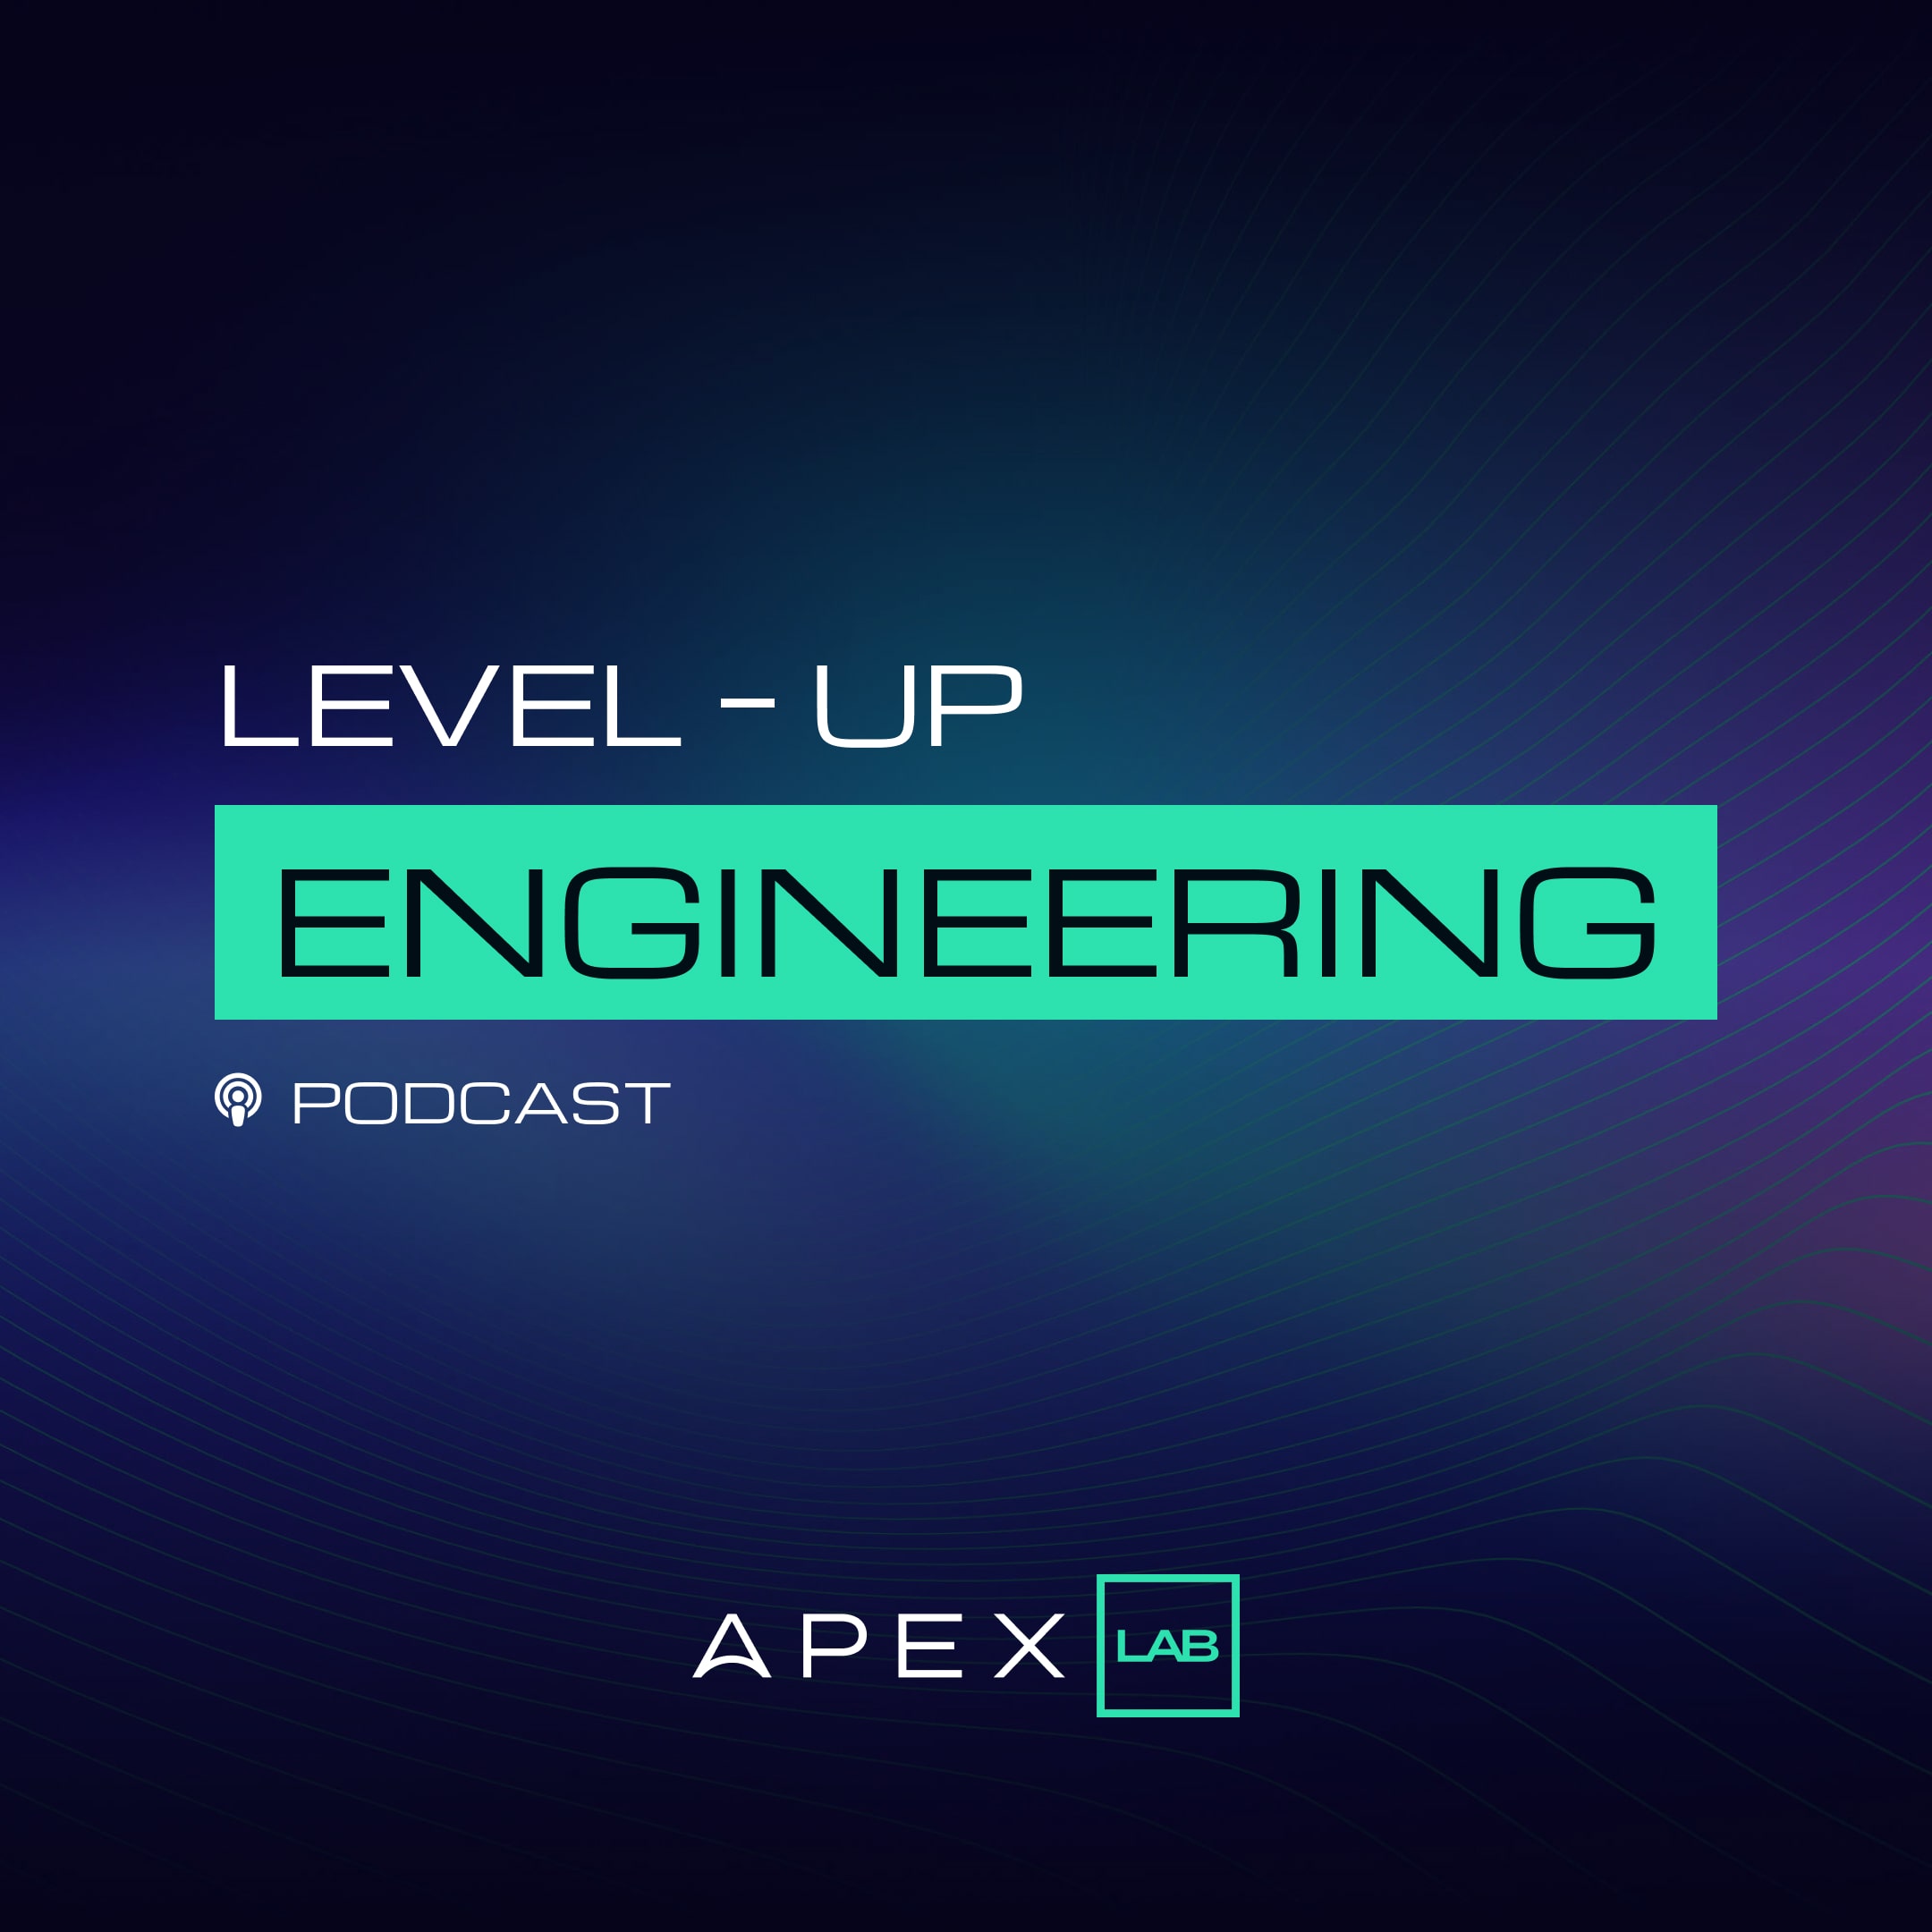 Artwork for podcast Level-up Engineering